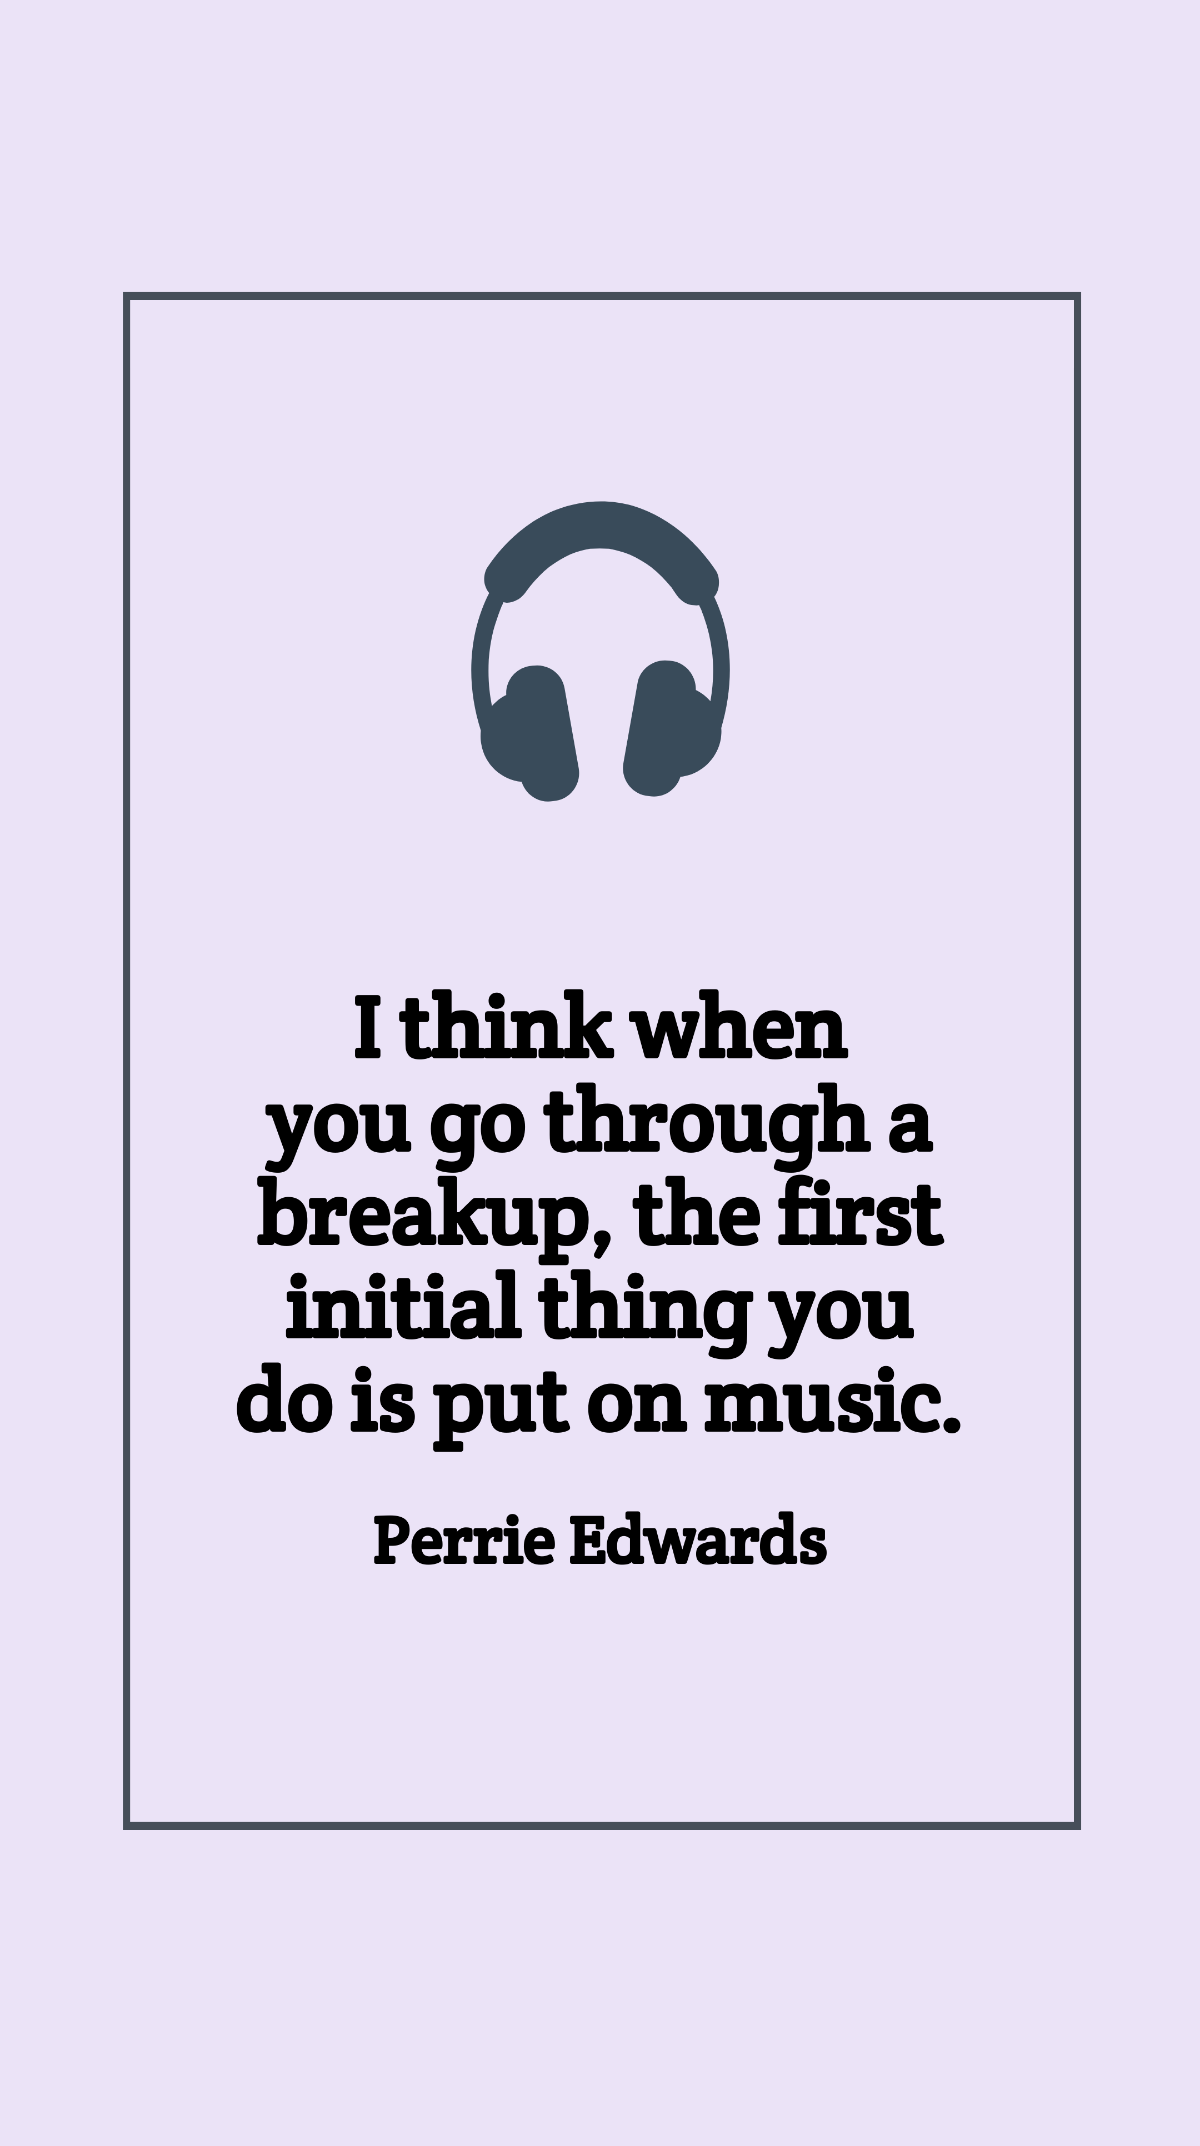 Free Perrie Edwards - I think when you go through a breakup, the first initial thing you do is put on music. Template